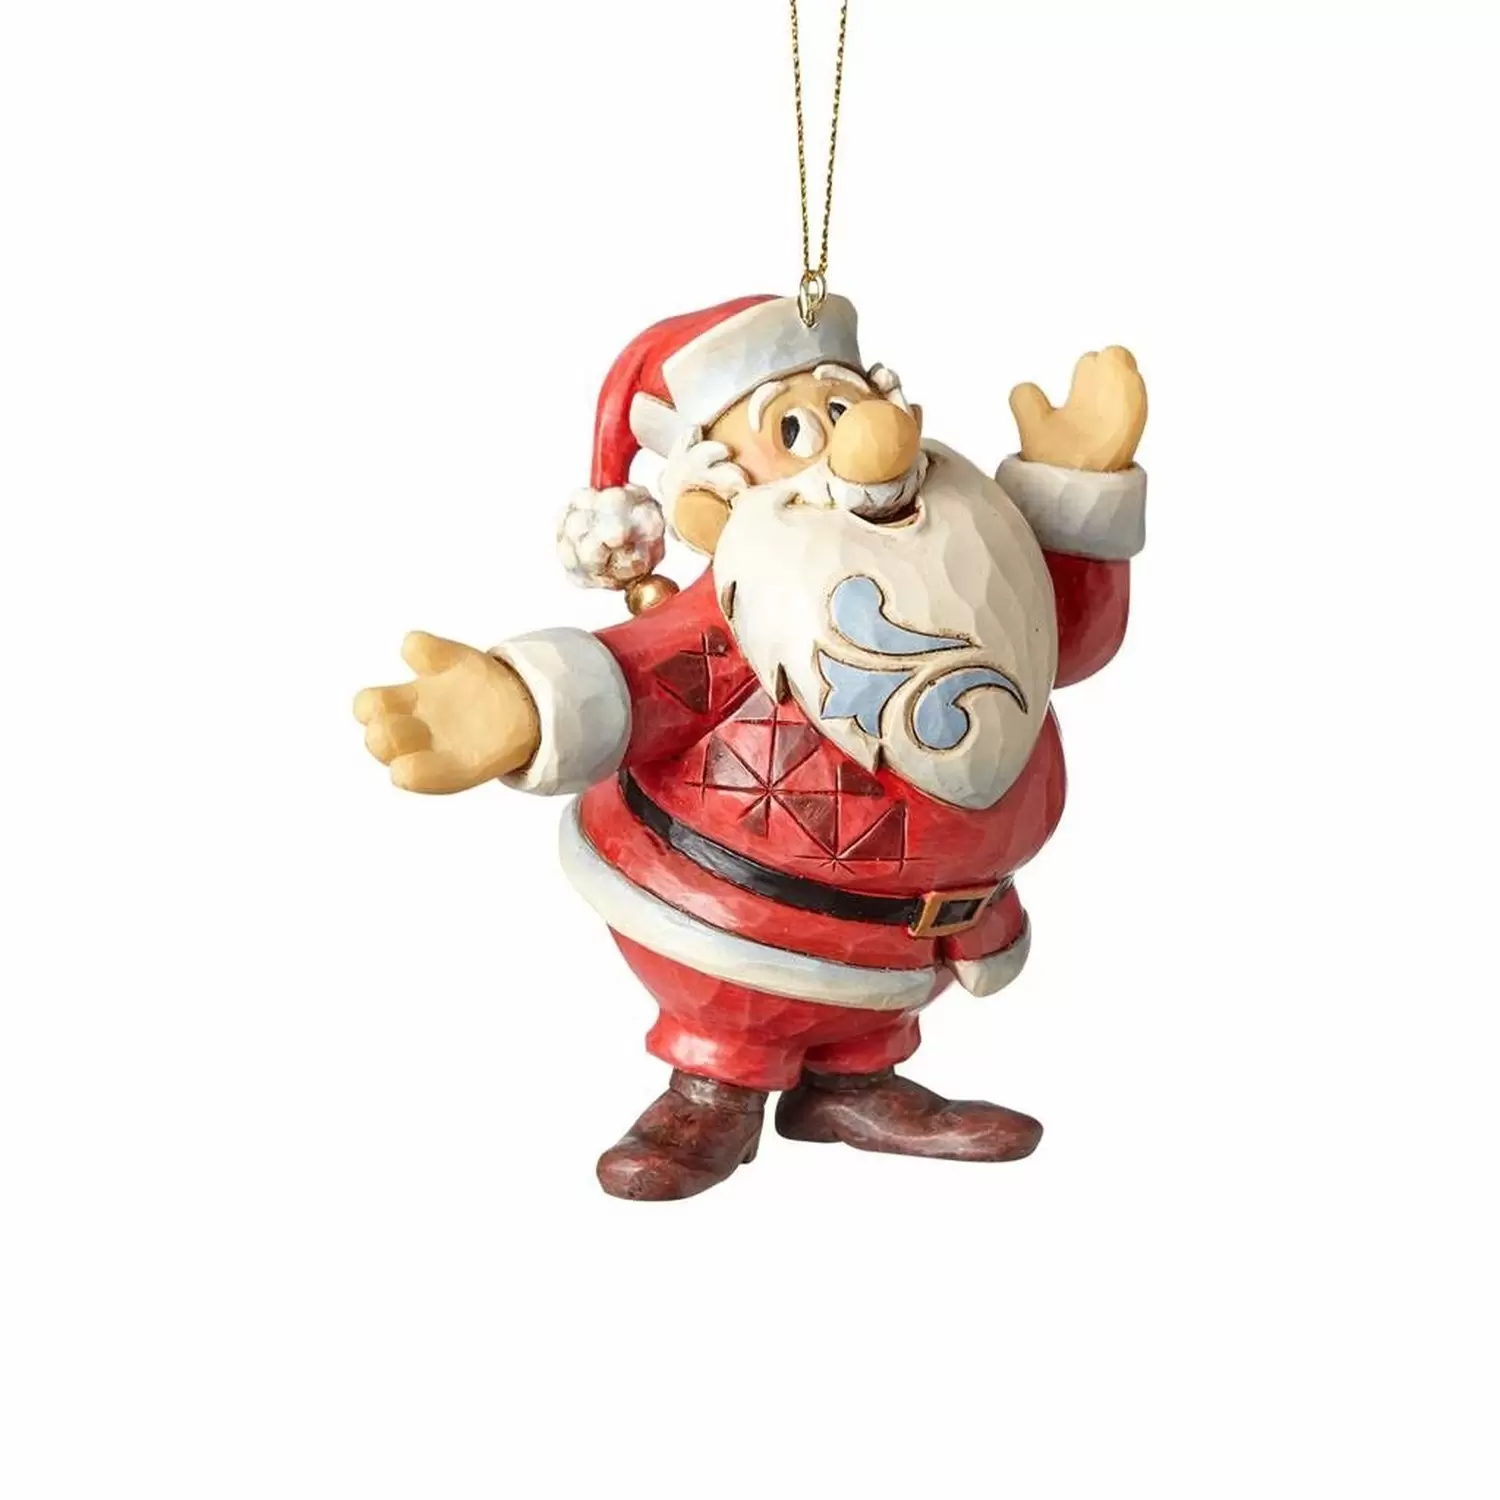 Cartoons  - Jim Shore - Santa from Frosty the Snowman Hanging Ornament